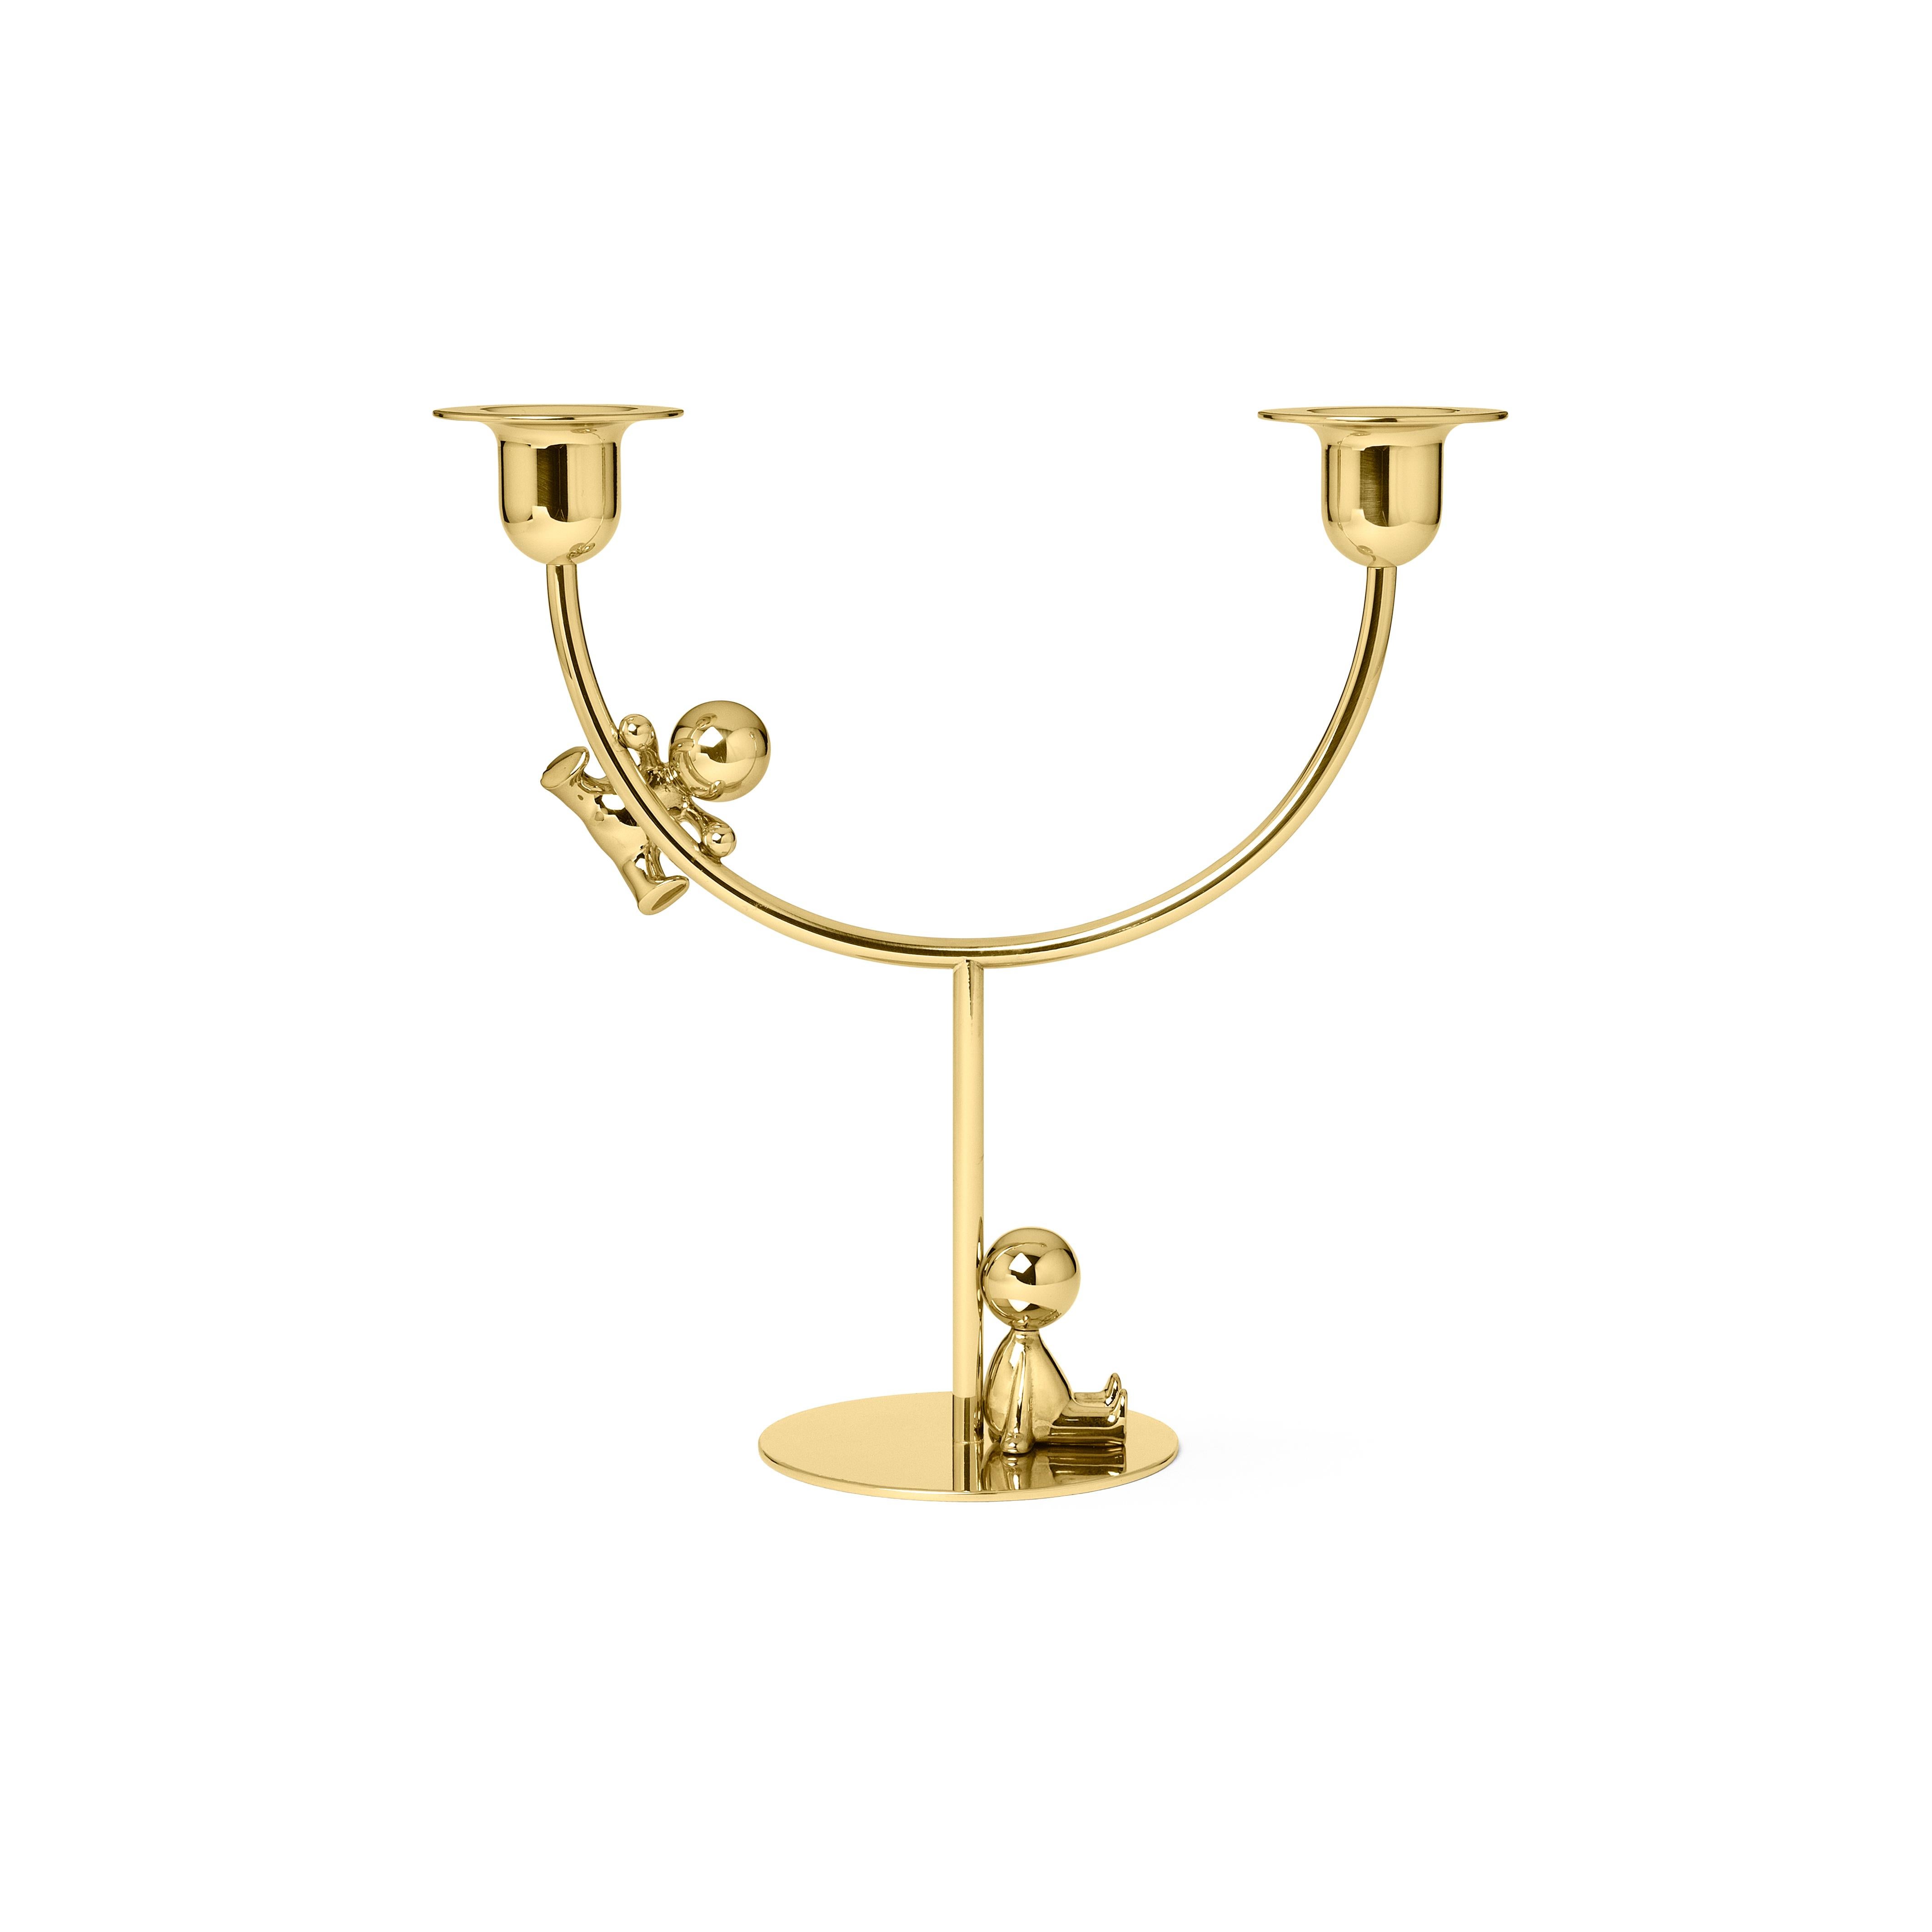 Candlesholder in brass
Omini is a family of products that plays on the inclusion and the relationship between the human figure with a series of monolithic objects from geometric and Minimalist design. Small Lilliputians attack and animate the pure